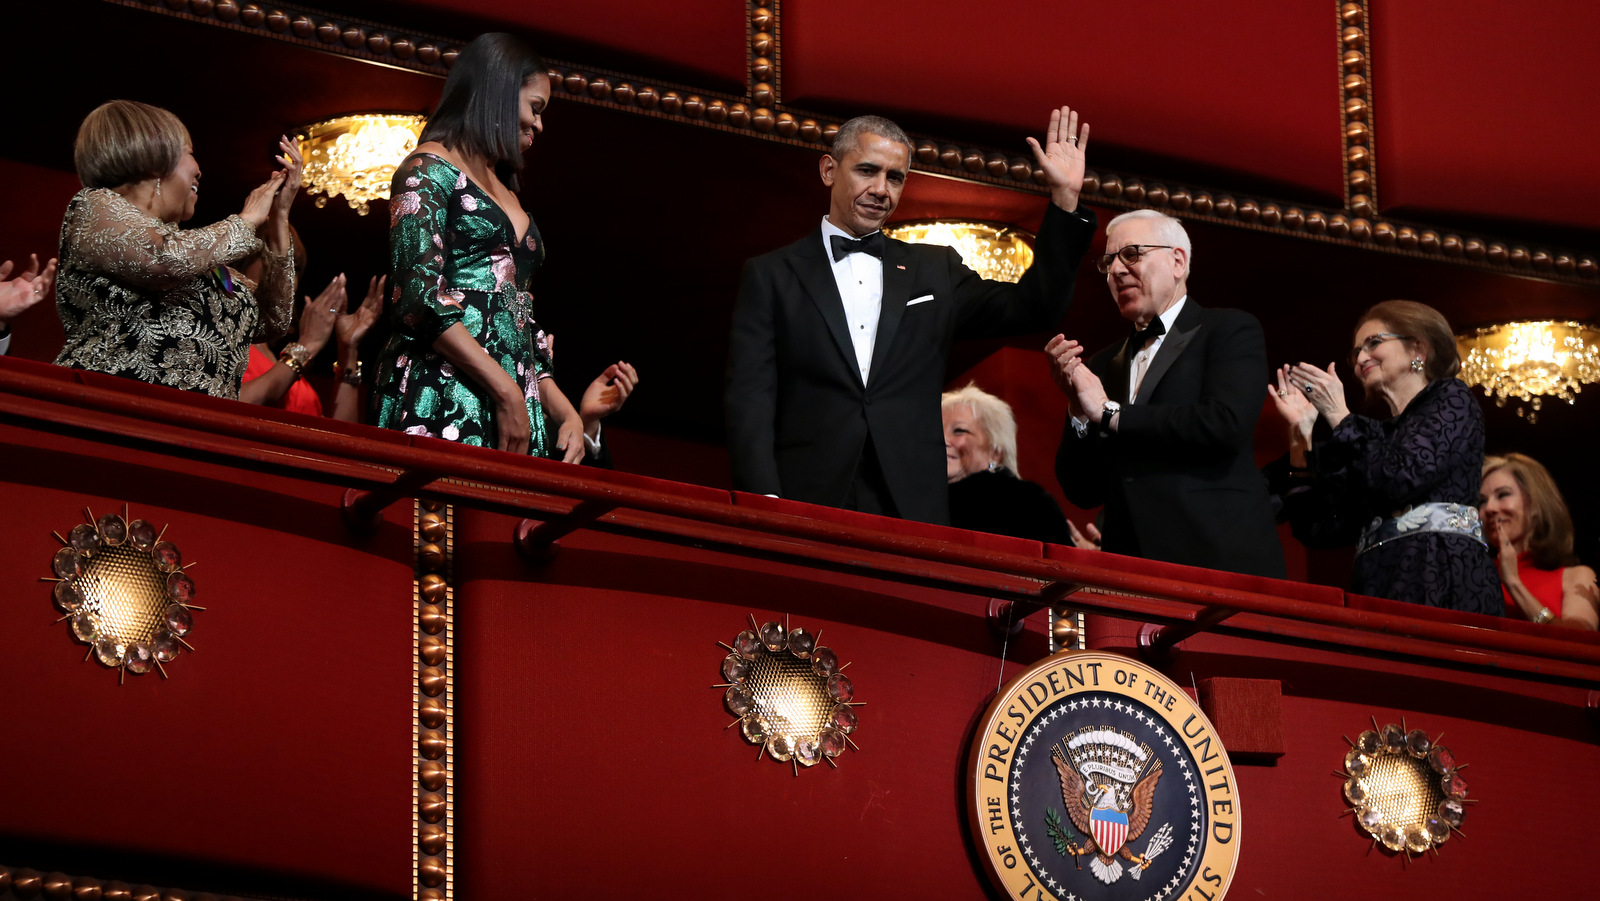 Barack and Michelle Obama are applauded during the Kennedy Center Honors gala in Washington, Dec. 4, 2016. (AP/Manuel Balce Ceneta)